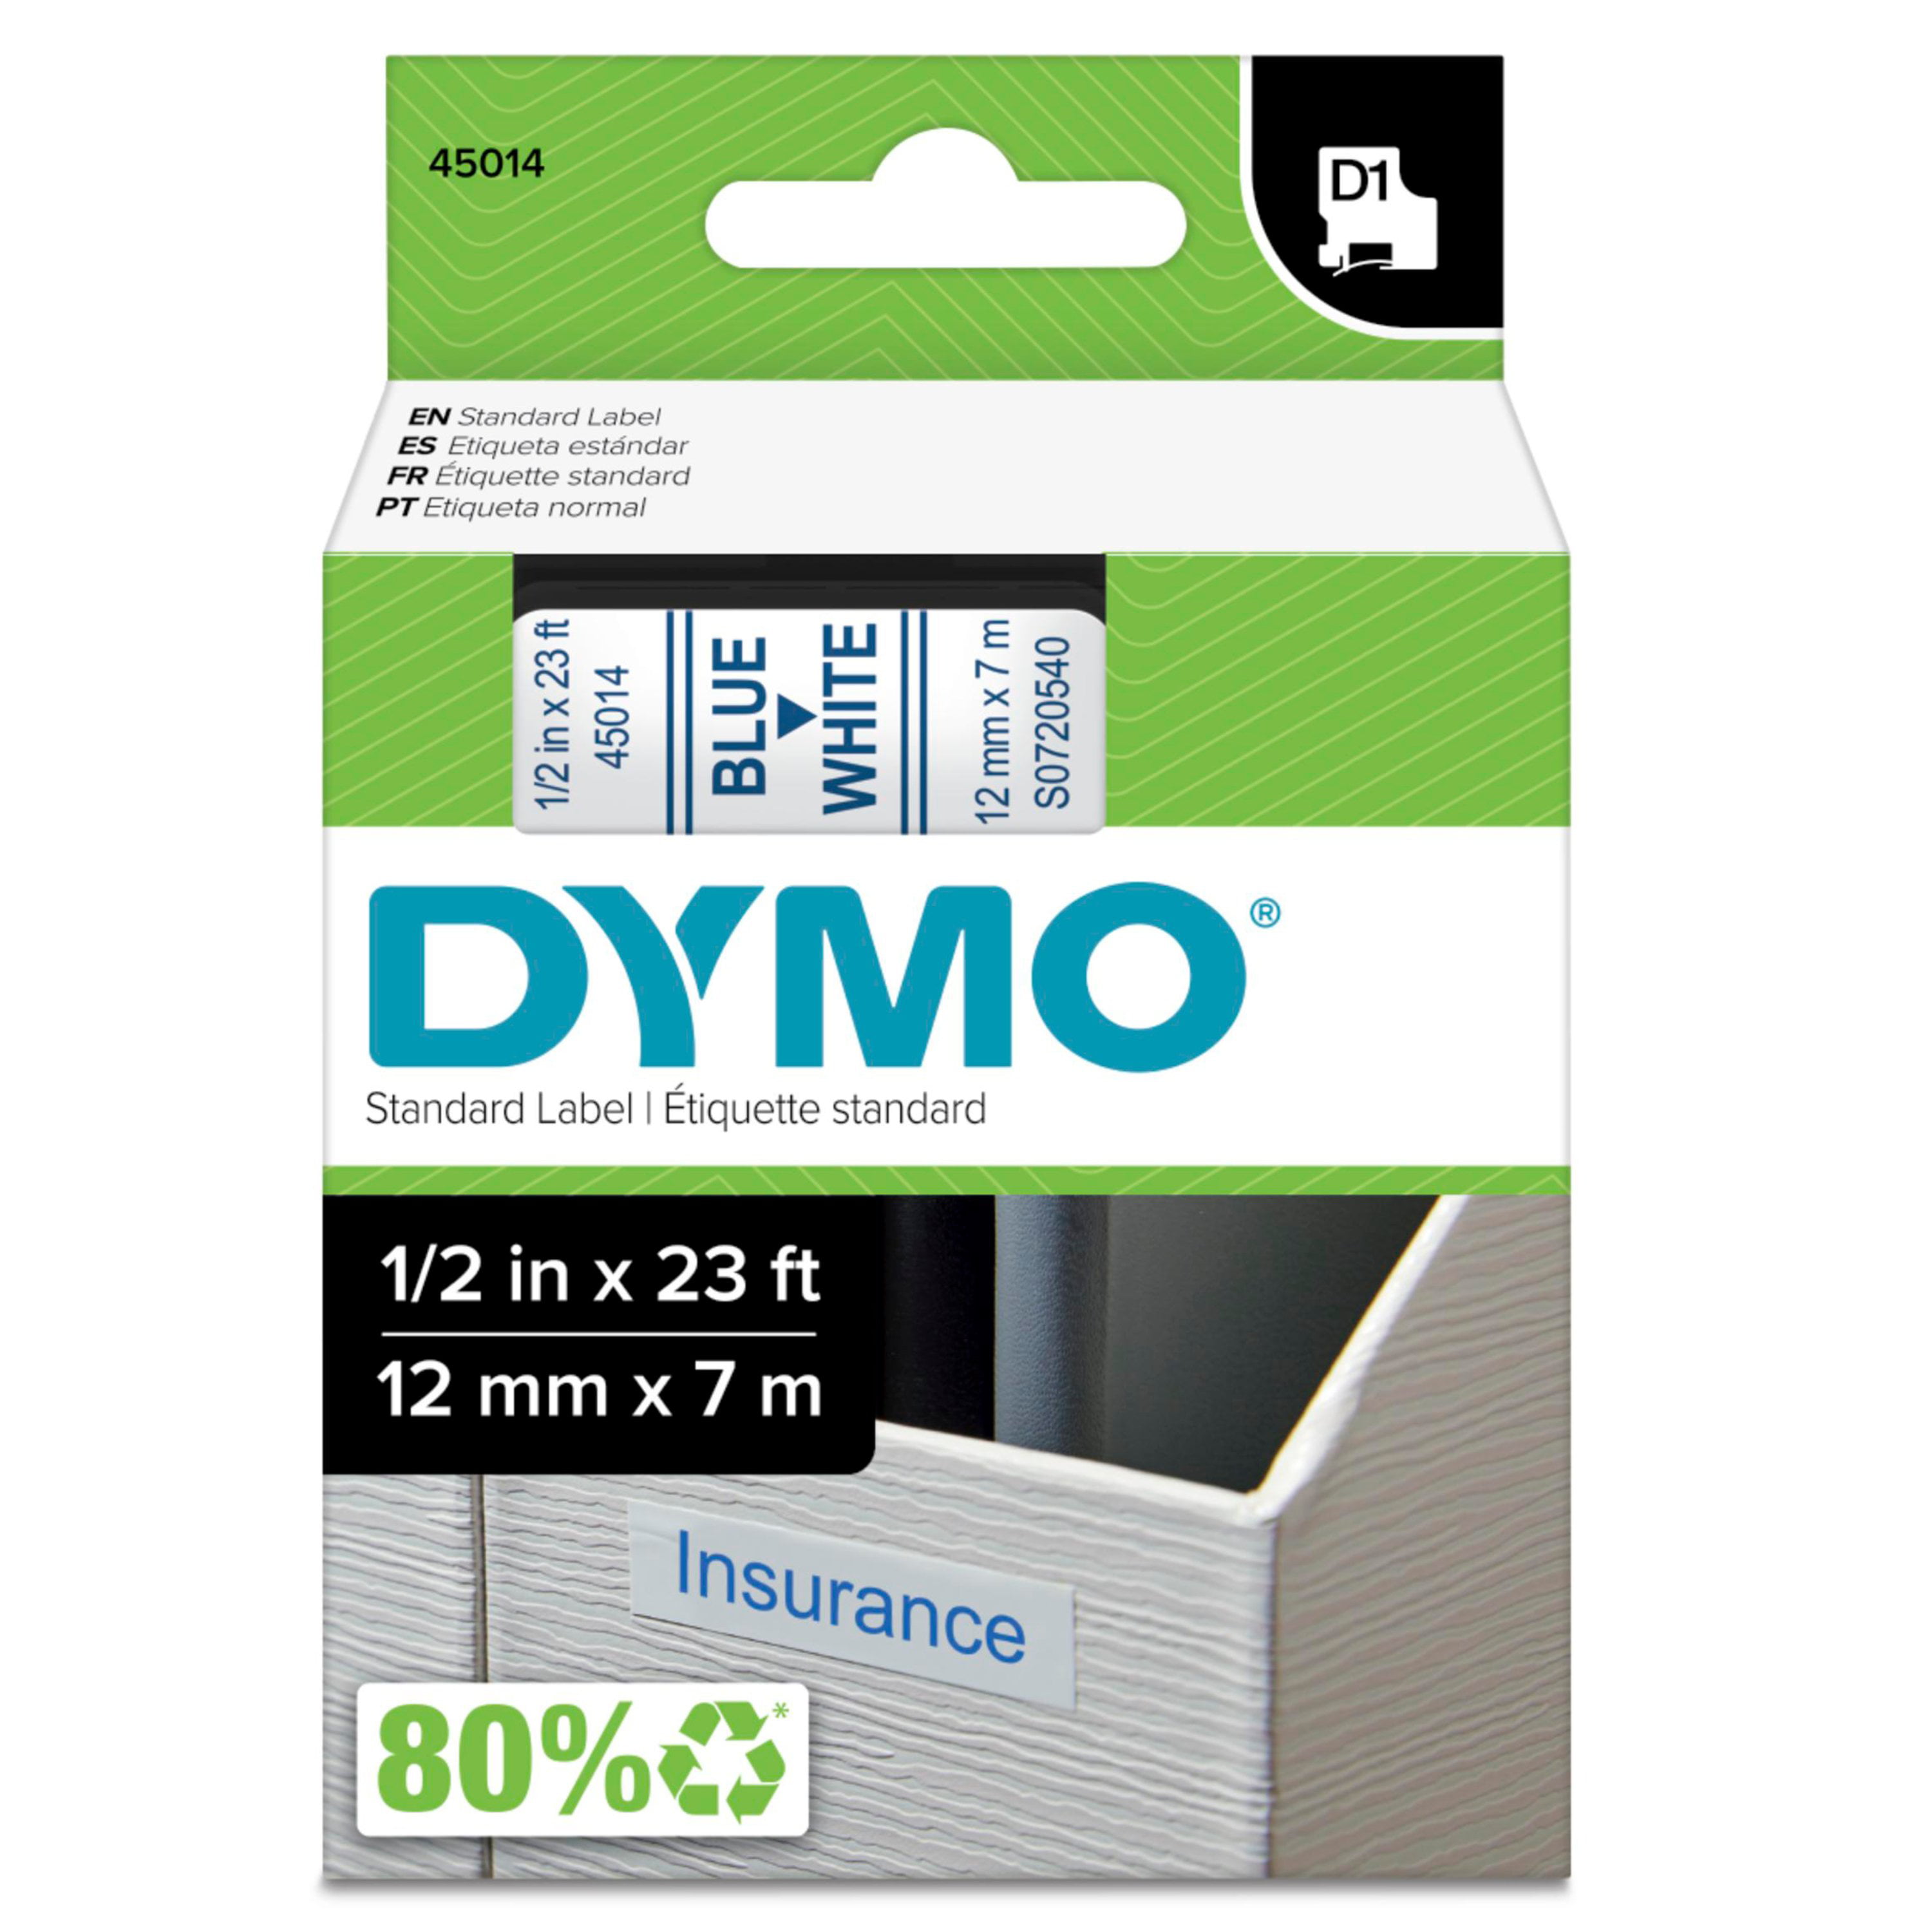 12mmx7m Plastic Label Tape For Dymo D1 45021 LetraTag White On Black Roll Refill